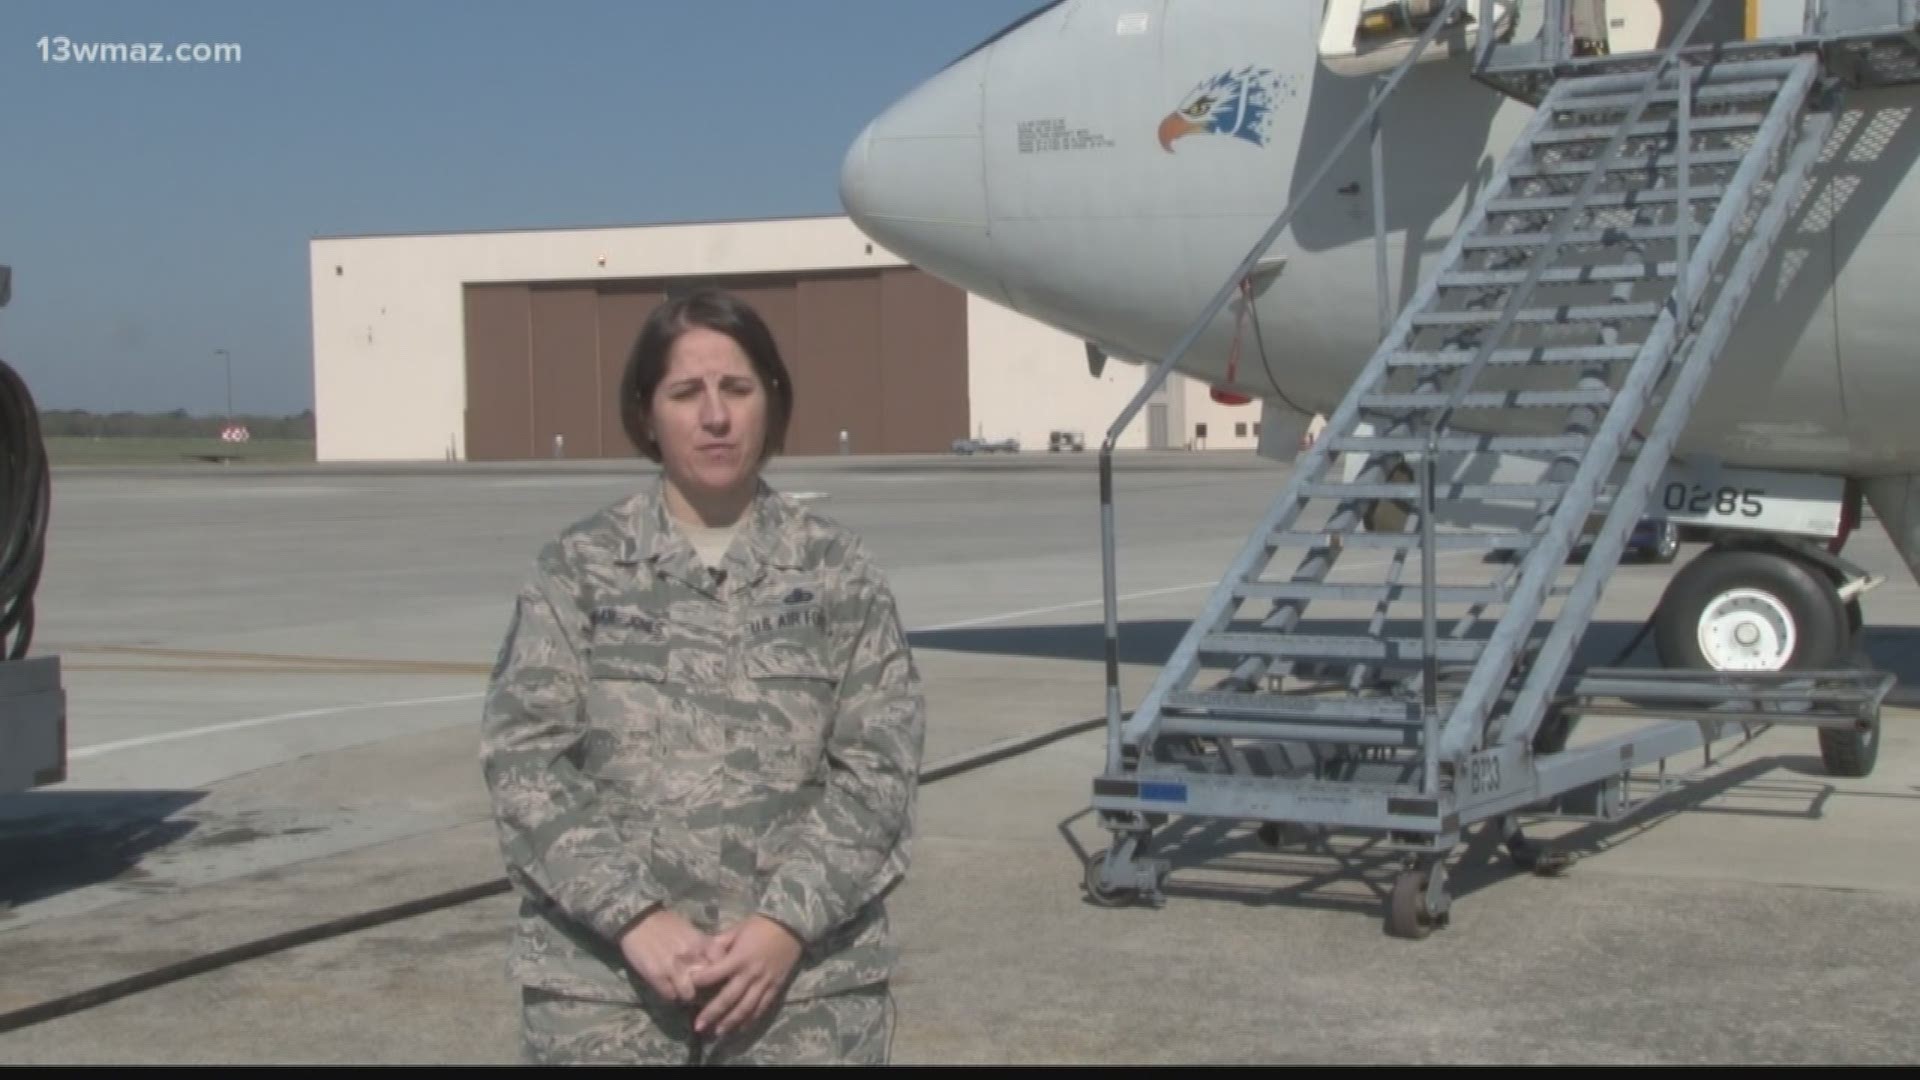 More than 3,500 women work in all different shops around Robins Air Force Base. Captain Mandy Kirschke, an Air Battle Manager with the 116th Air Control Wing says she hopes to see that number continue to grow.